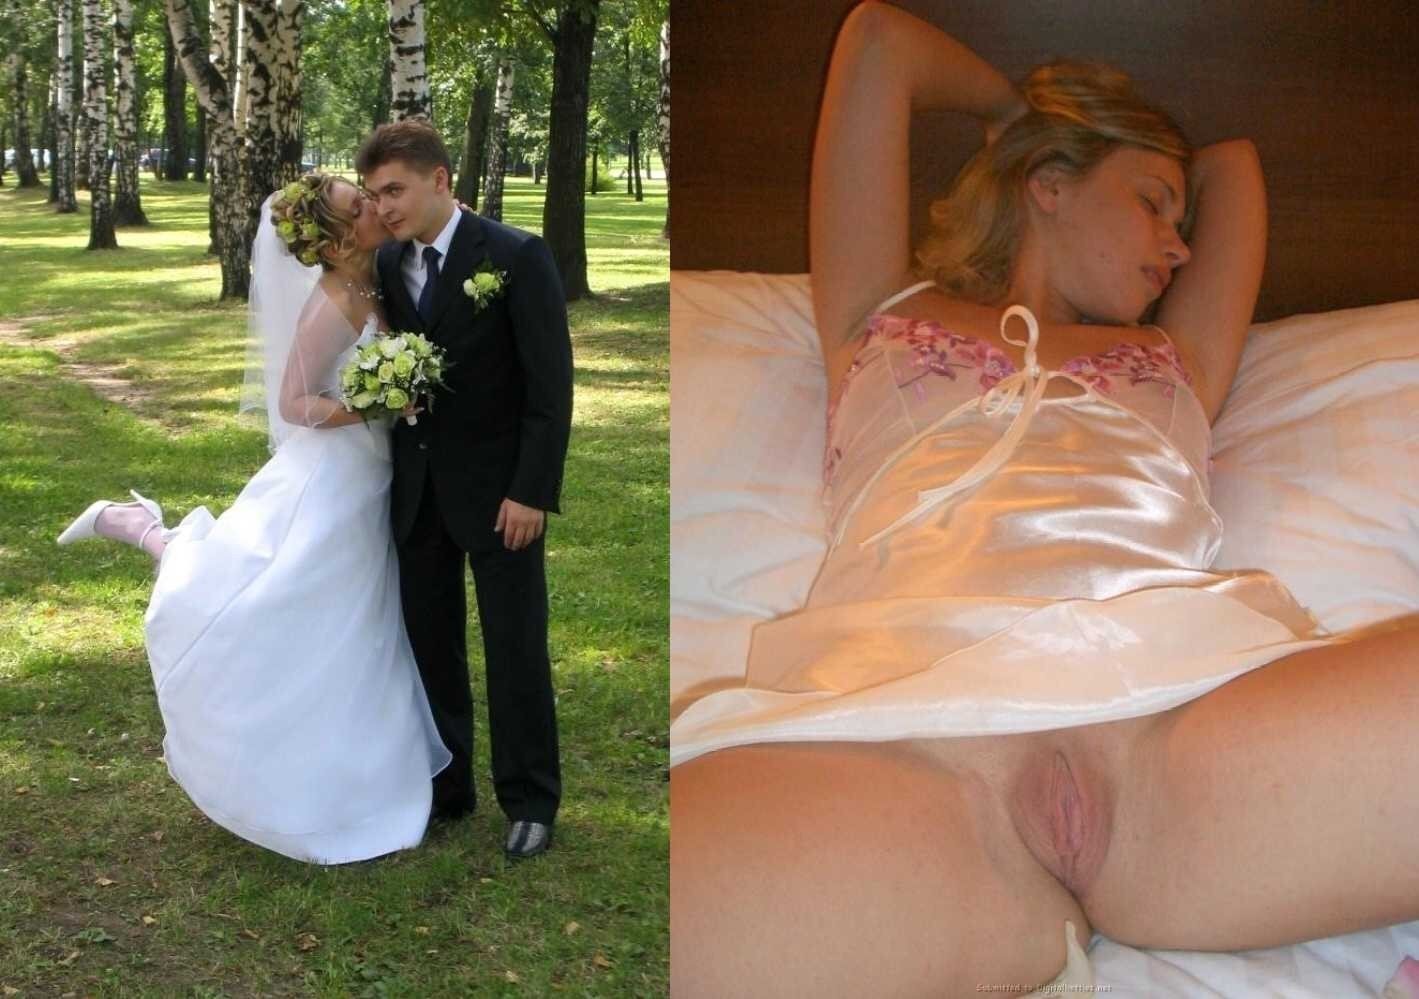 Naked Bride and Gromo